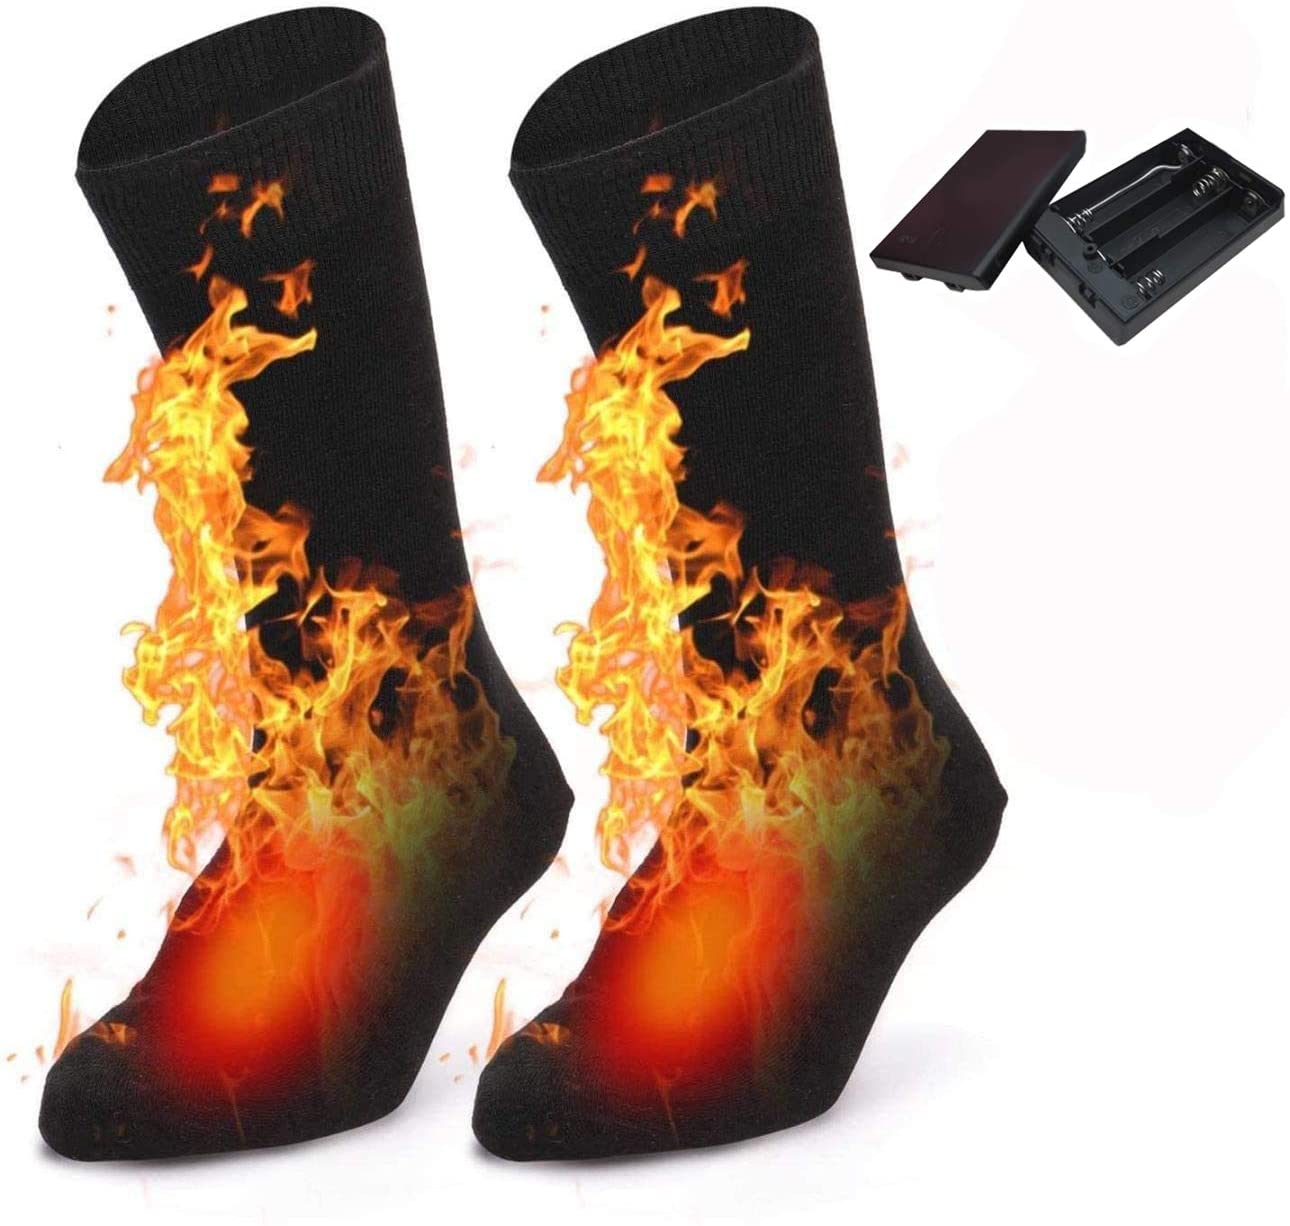 Jonephe Heated Socks, Heated Socks for Men and Women, Electric Thermal Insulated Socks Heating Thermal Sock for Hunting Skiing Camping Hiking Fishing(Best Easter Days' Gift) - Home Decor Gifts and More